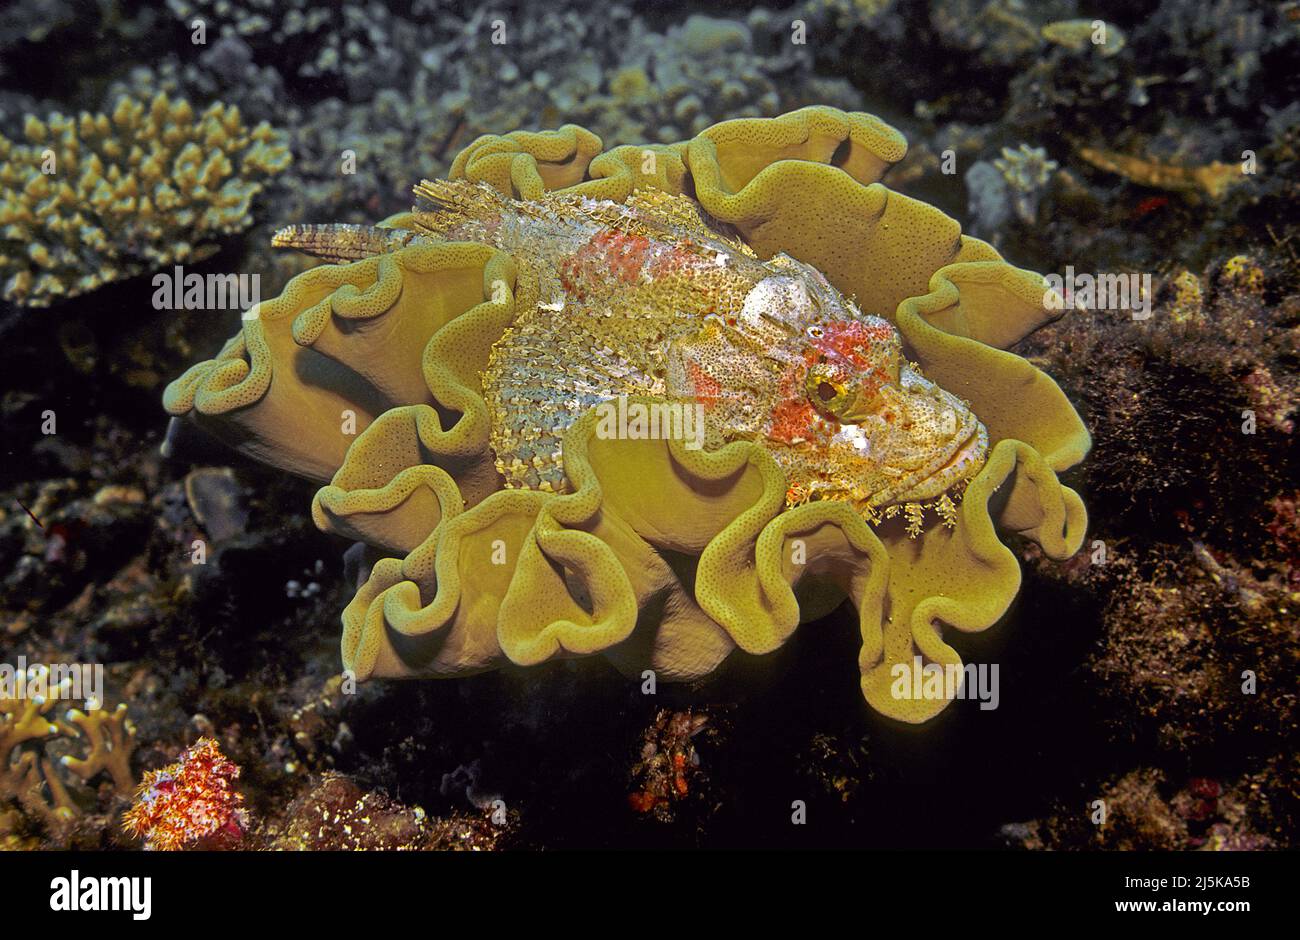 Tasseled Scorpionfish or Bearded scorpionfish (Scorpaenopsis oxycephala), resting in a leather coral, Maldives, Indian ocean, Asia Stock Photo